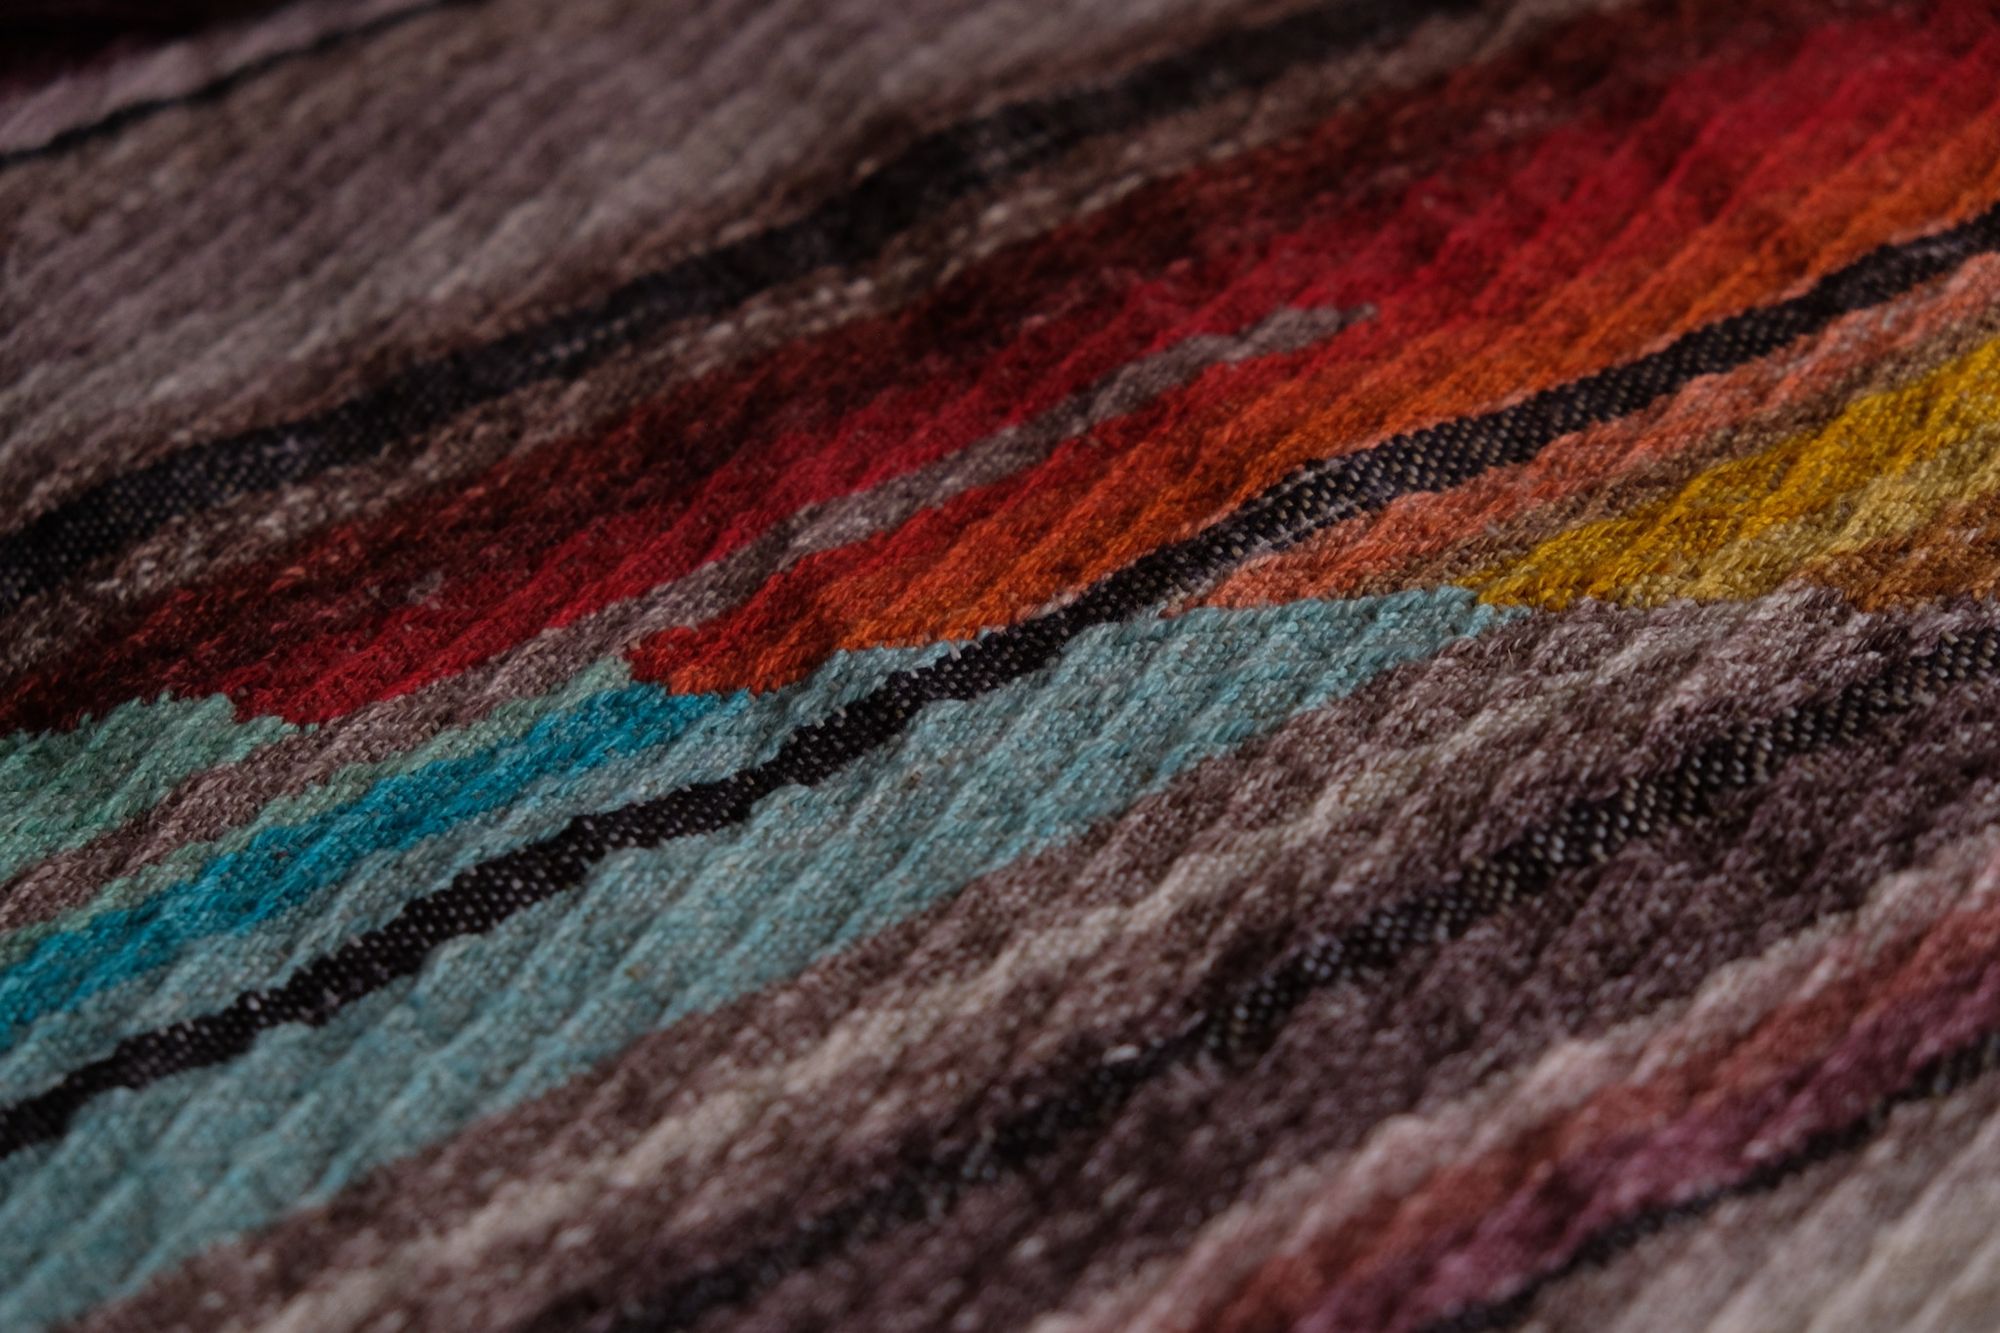 details of geometric shaped, natural and rainbow colored handwoven, diamond pattern fabric on a wooden floor